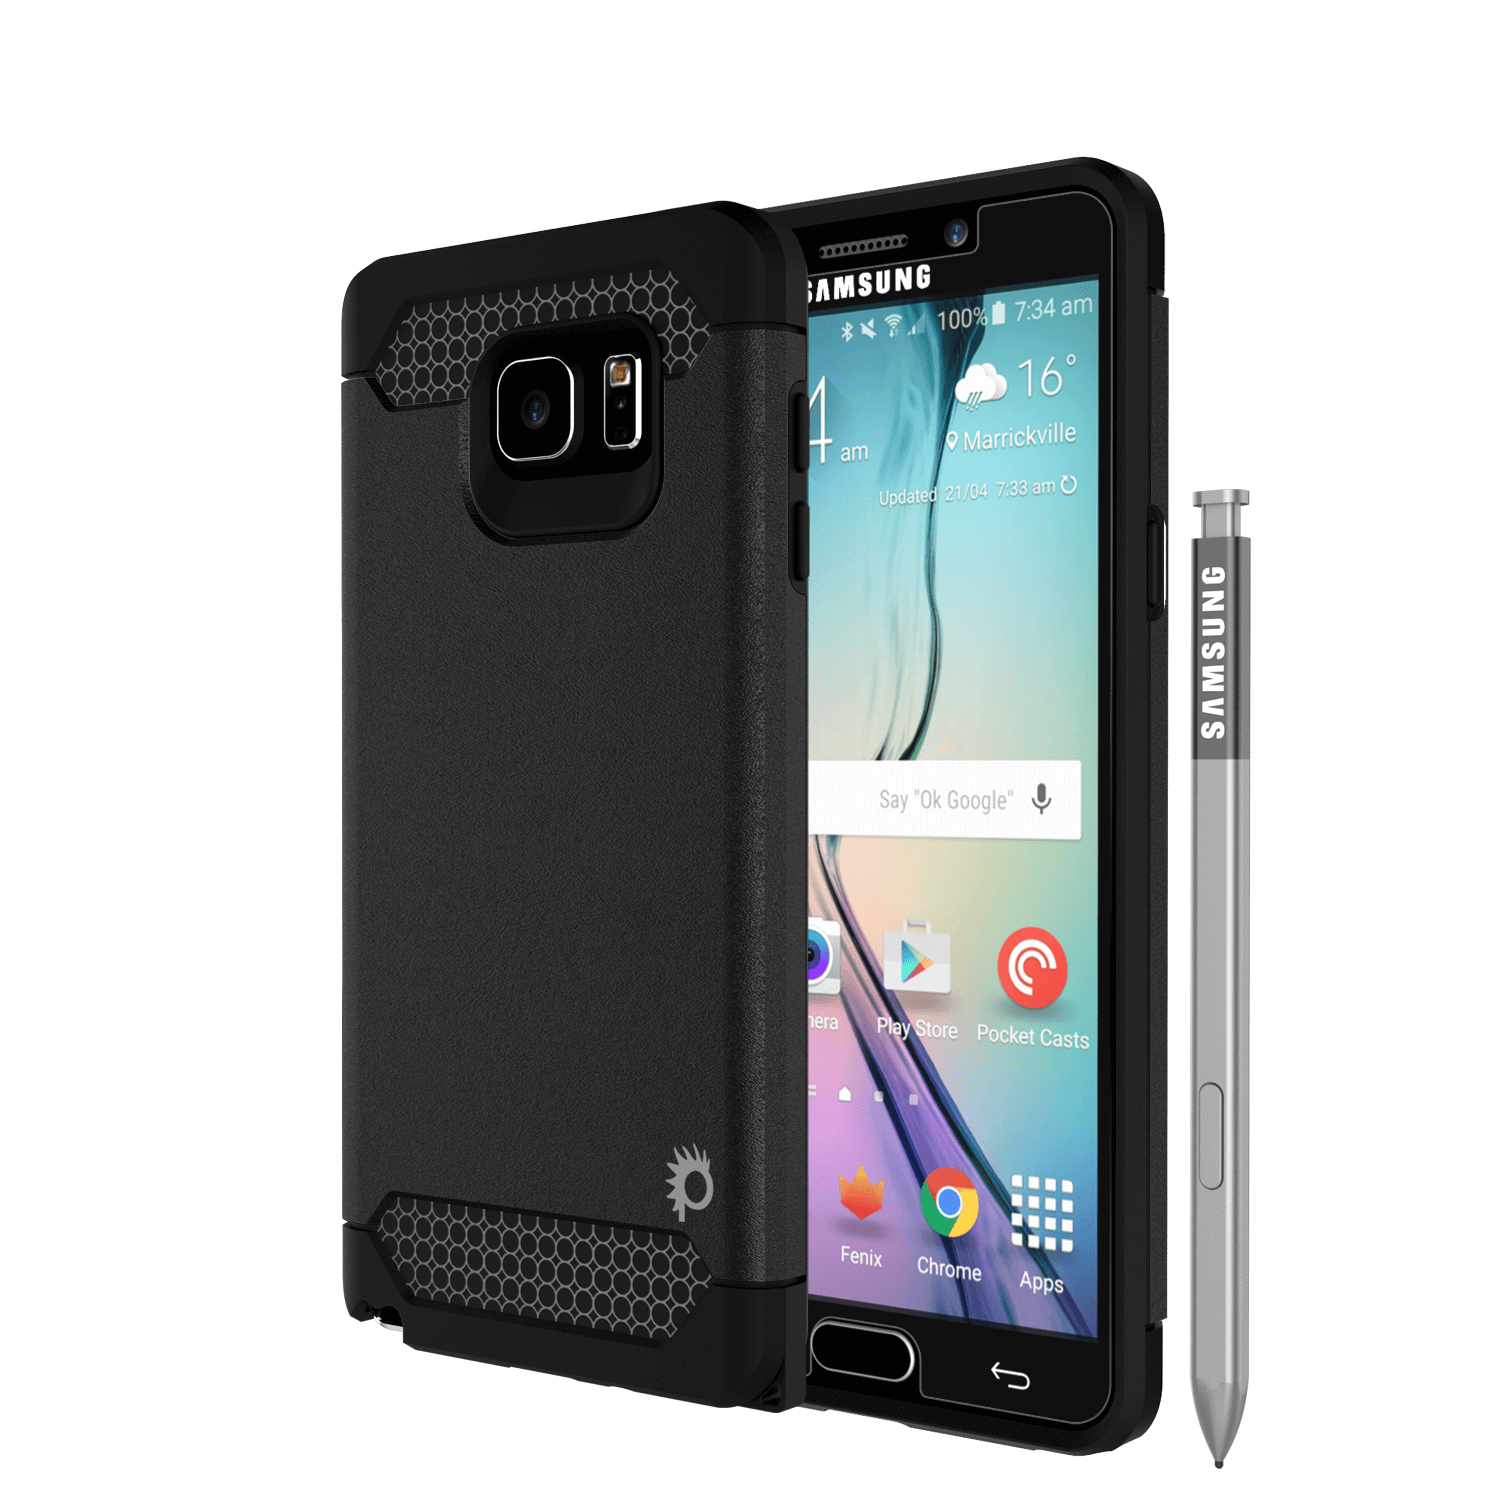 Galaxy Note 5Case PunkCase Galactic Black Series Slim Protective Armor Soft Cover Case w/ Tempered Glass Protector Lifetime Warranty